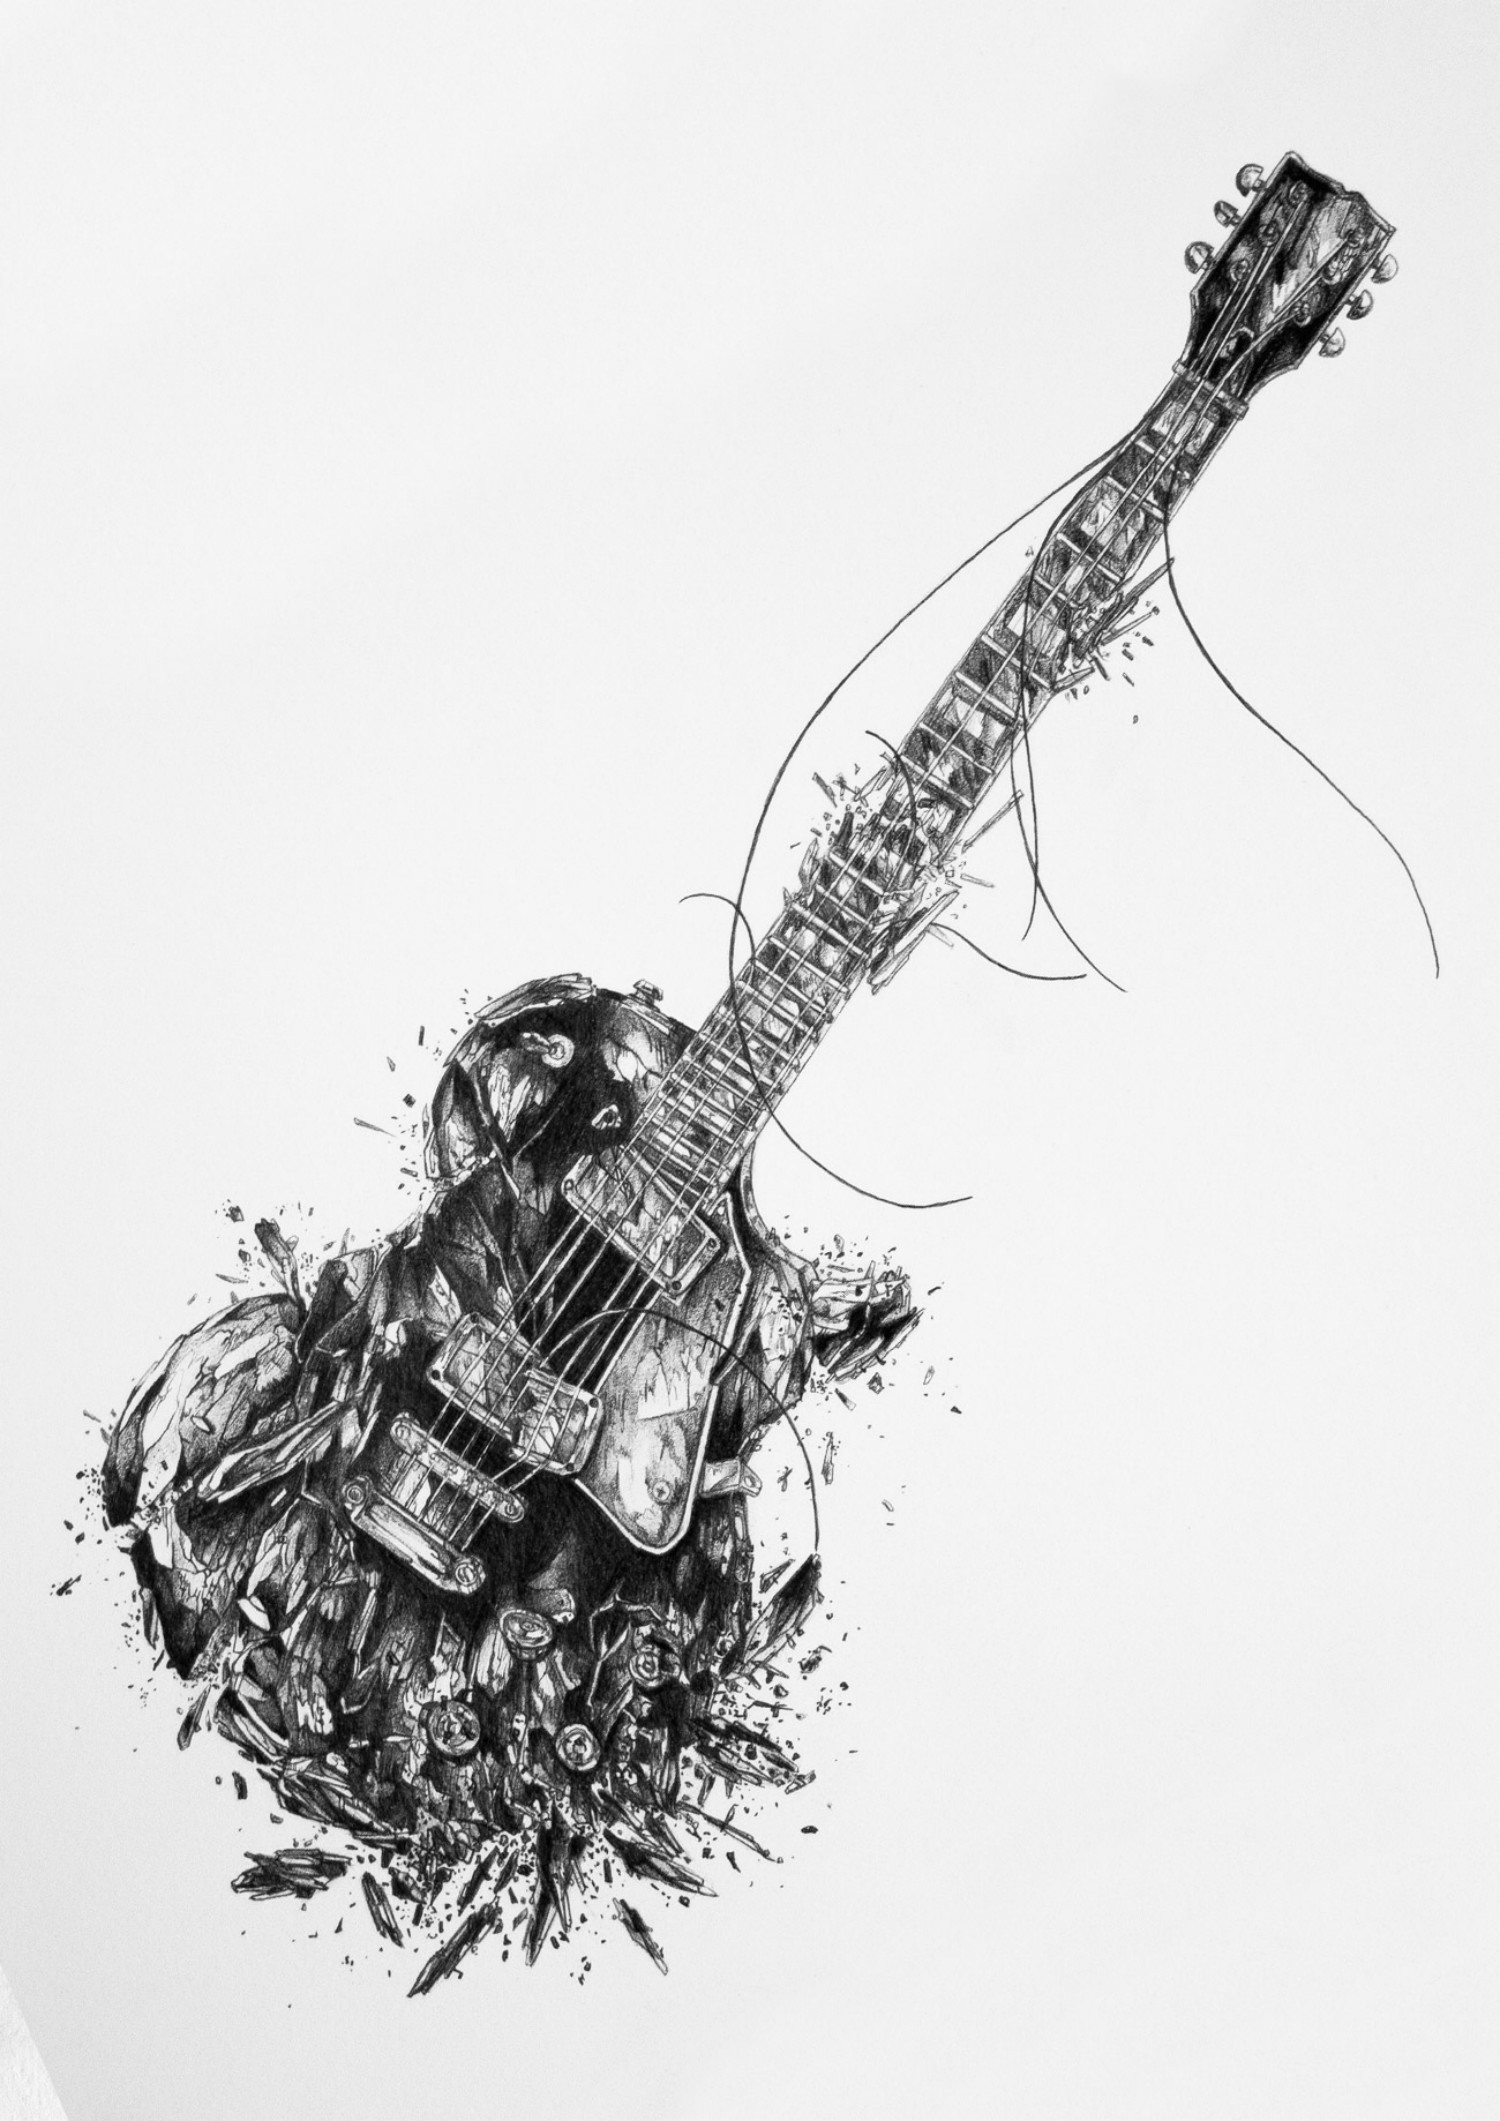 drawing, illustration, digital art, monochrome, minimalism, portrait display, white background, cartoon, pattern, electric guitar, destroyed, sketch, black and white, monochrome photography Gallery HD Wallpaper